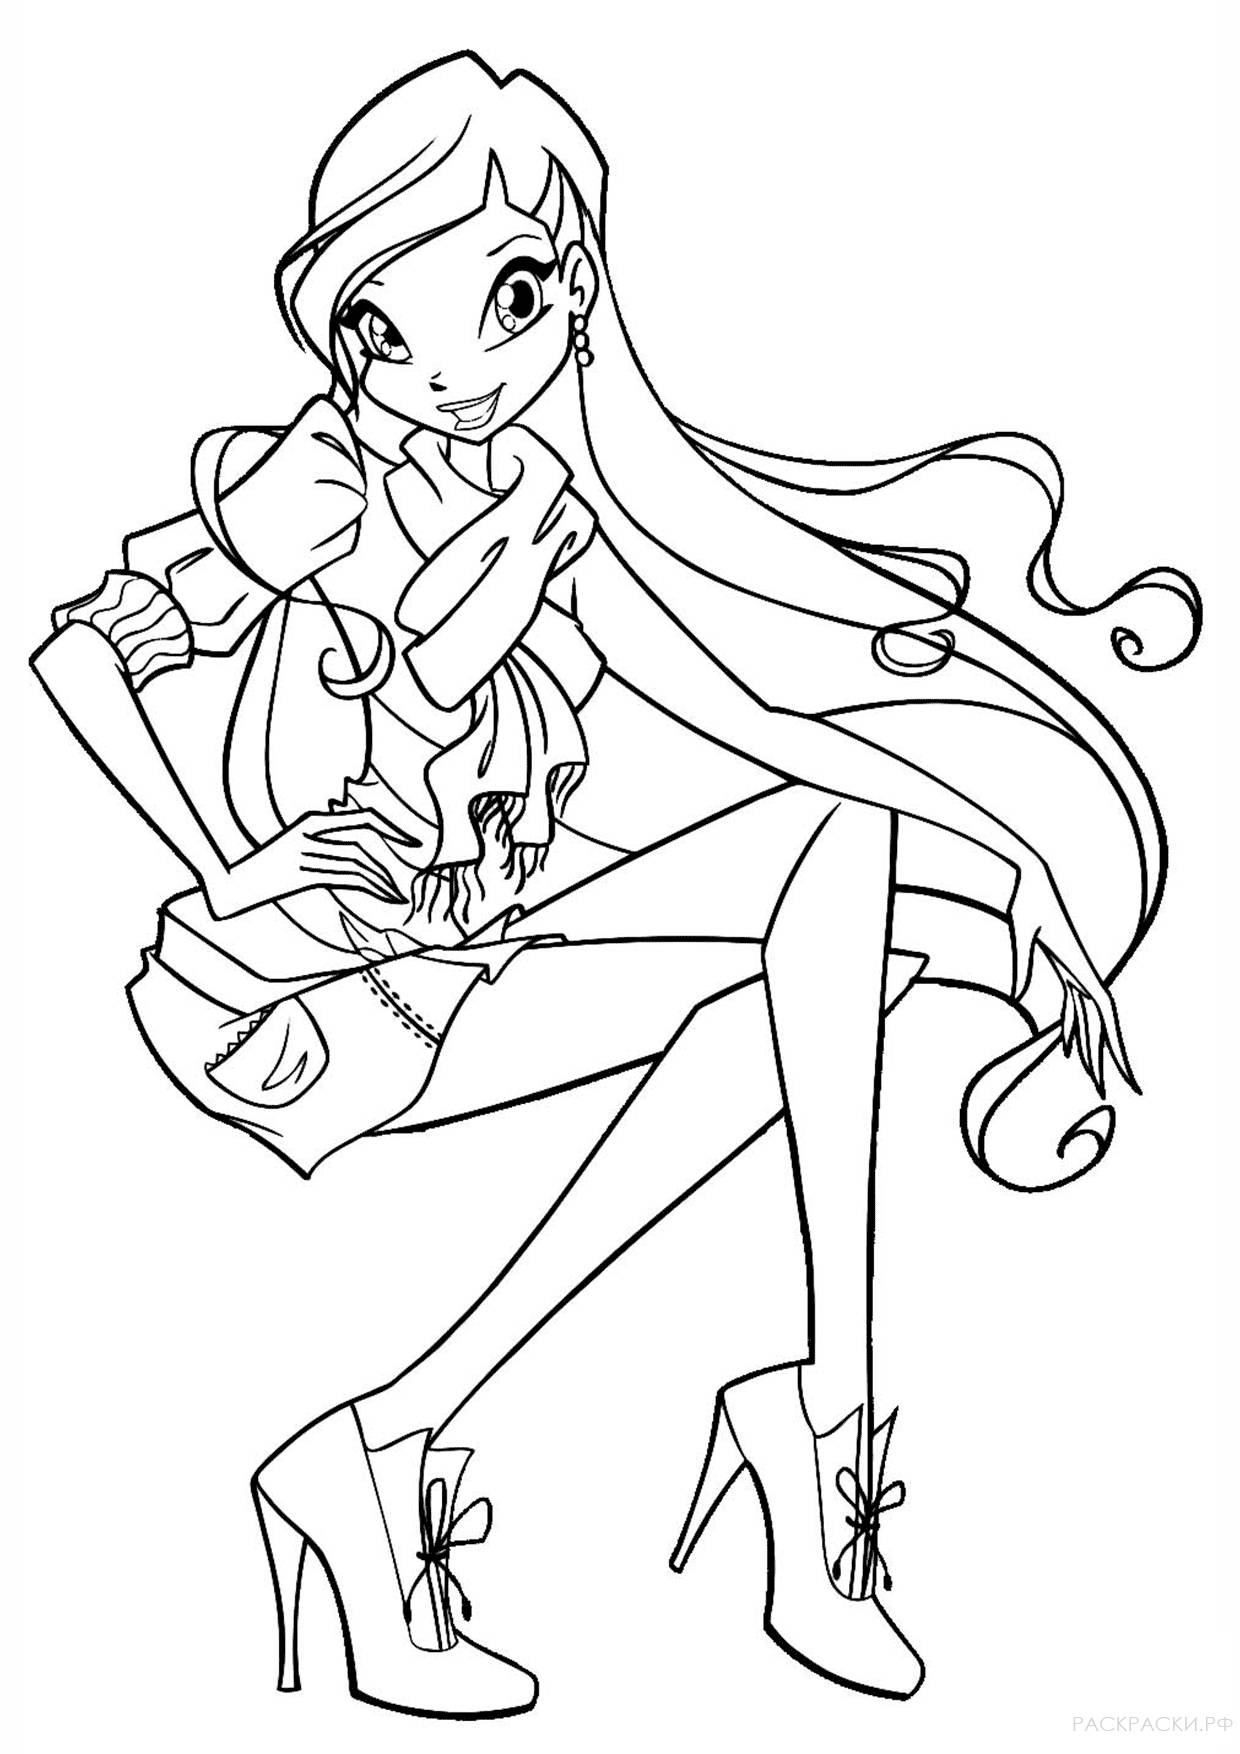 Coloring page graceful stella winx